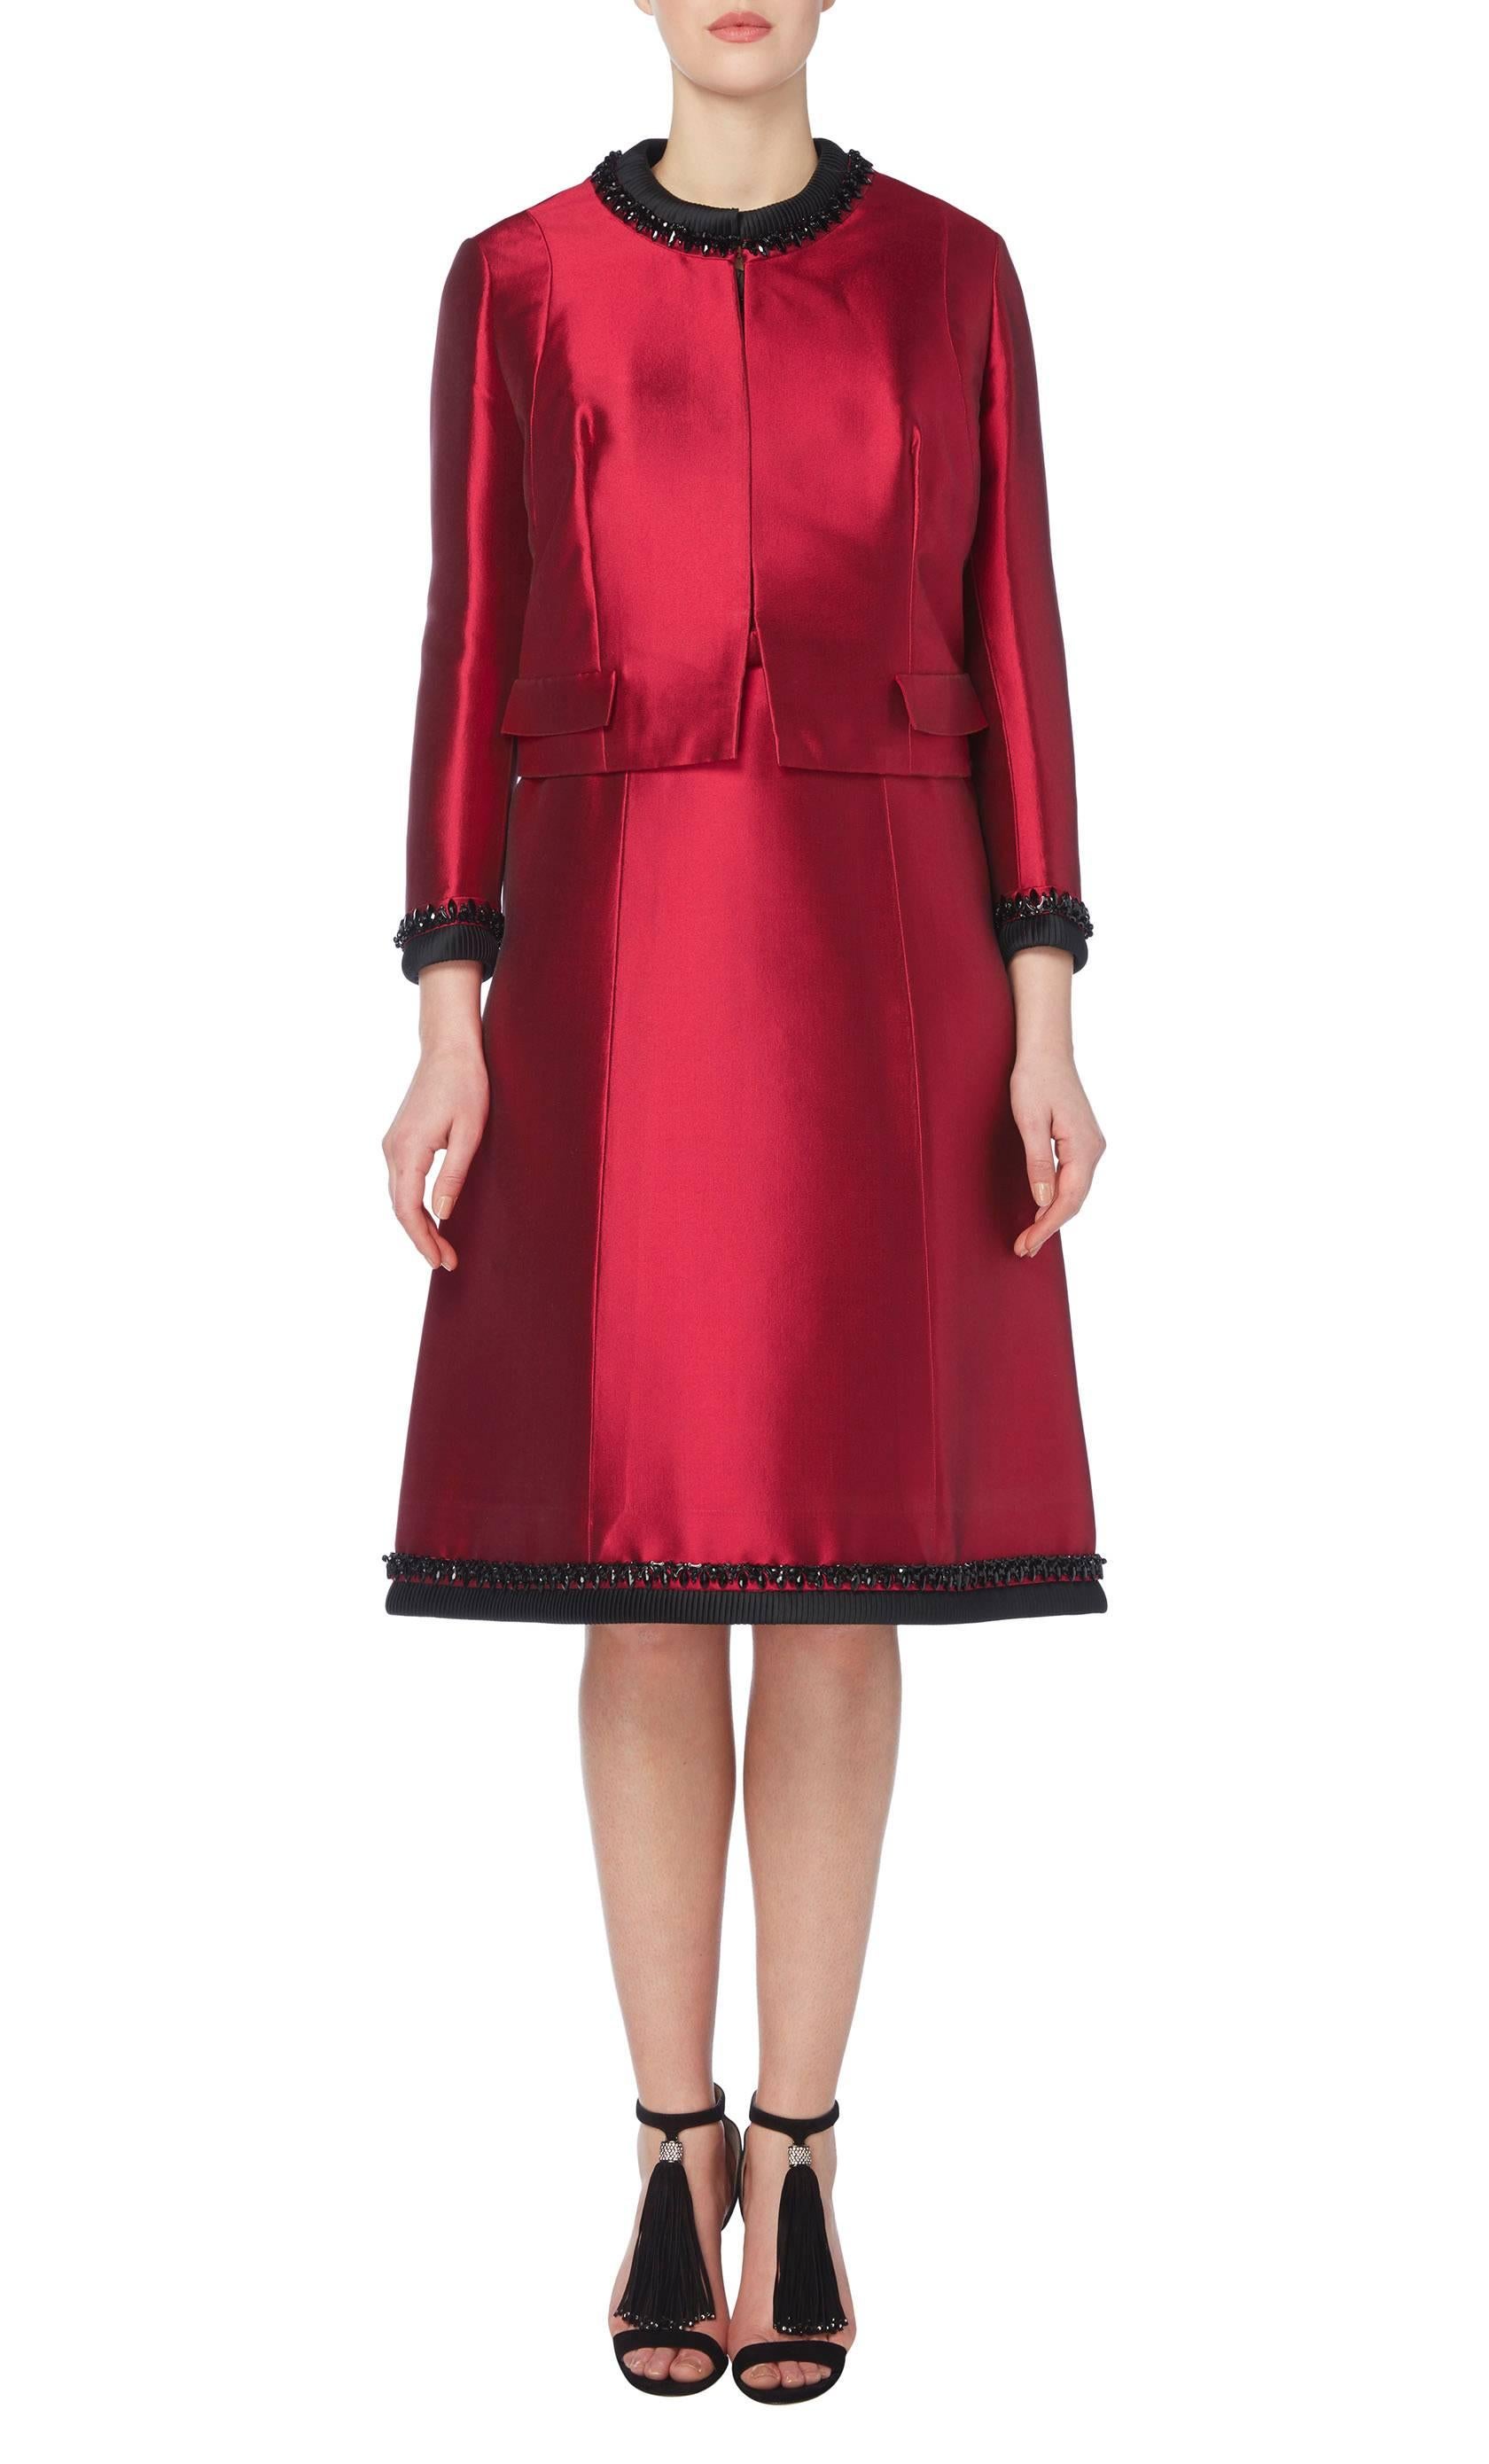 A beautiful piece of haute couture, this Balmain dress suit is ideal for cocktail events or special occasions. Constructed in a stunning shade of raspberry silk, the dress and jacket feature matching black ribbed trimming with jet beading